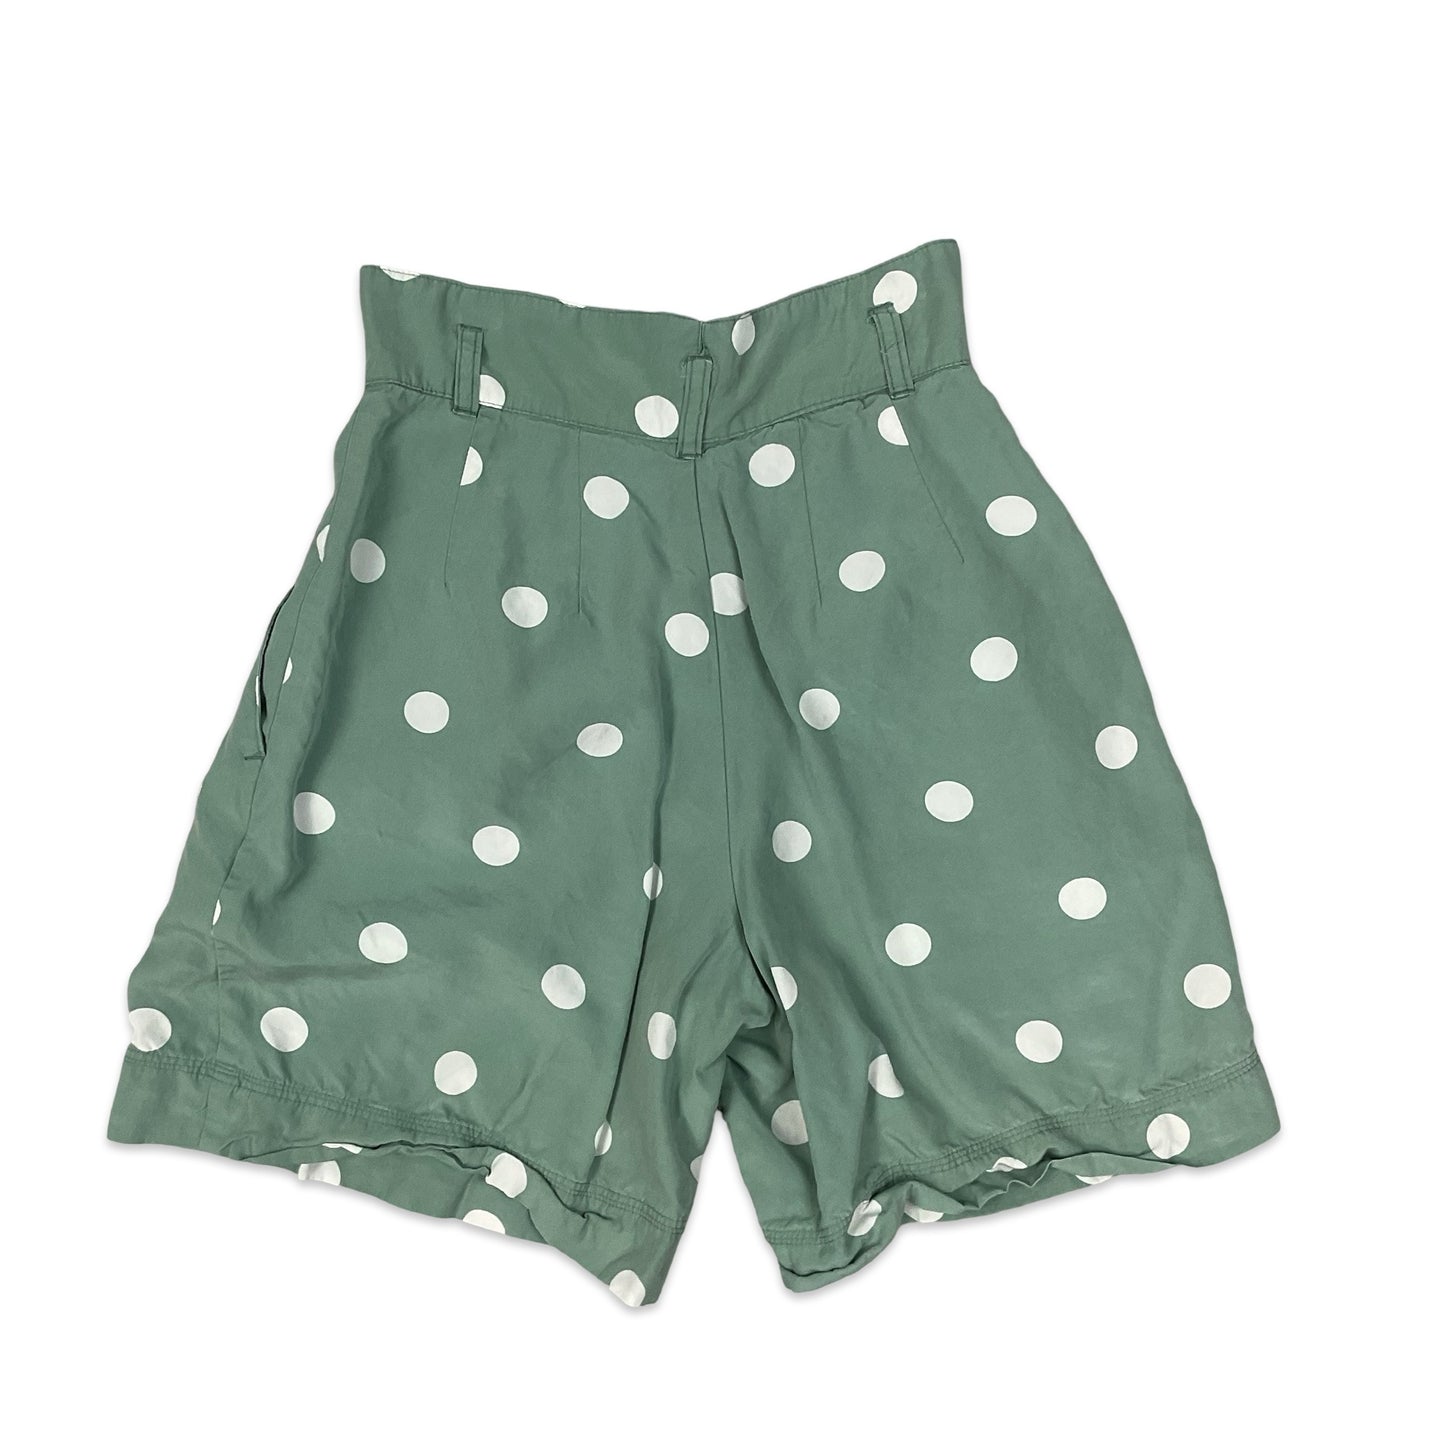 Vintage Green & White Polka Dot High Waisted Pleated Shorts 6